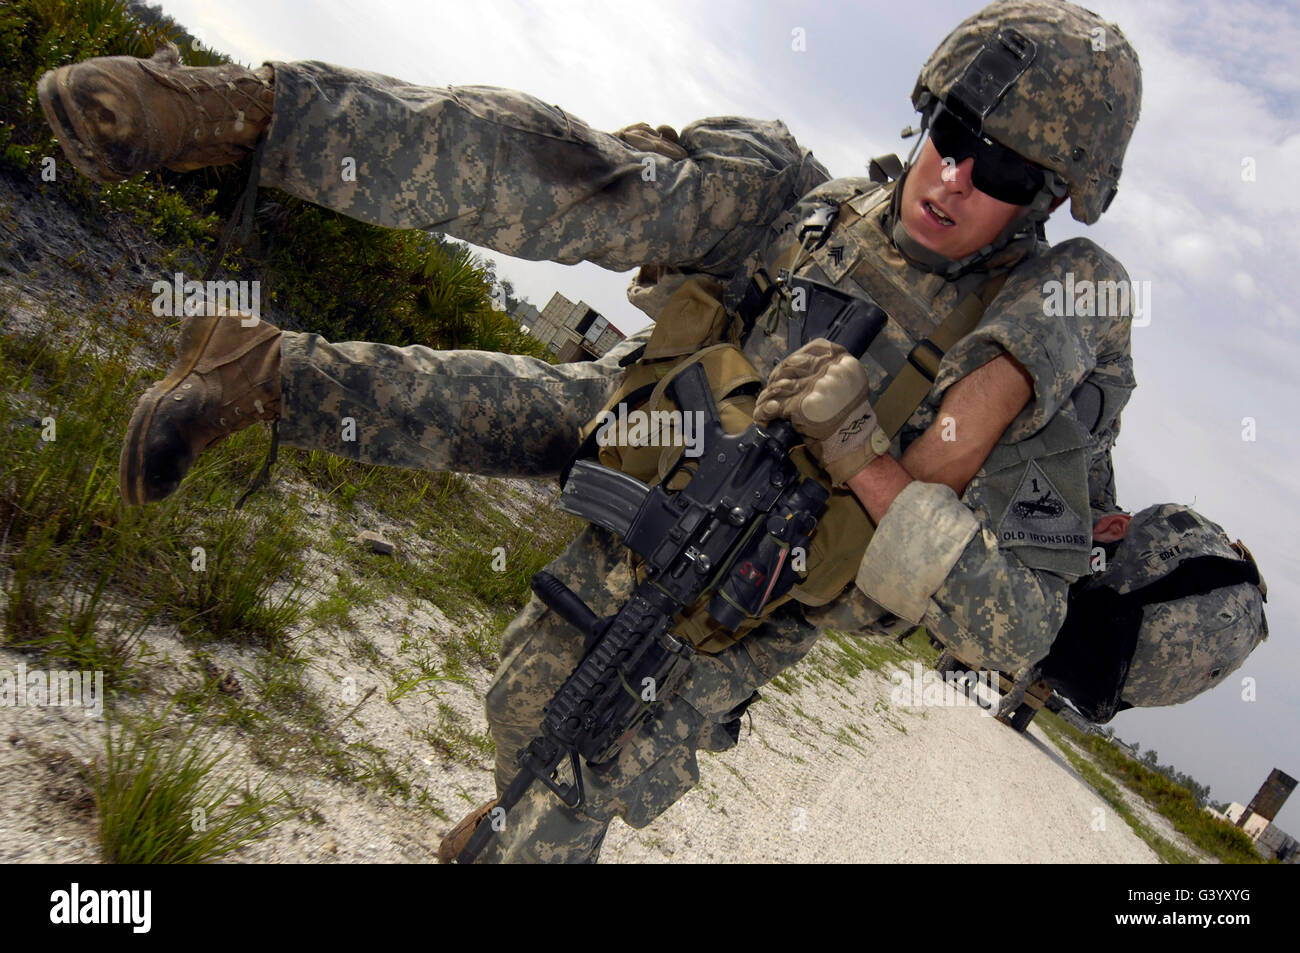 A soldier carries a wounded soldier to safety. Stock Photo